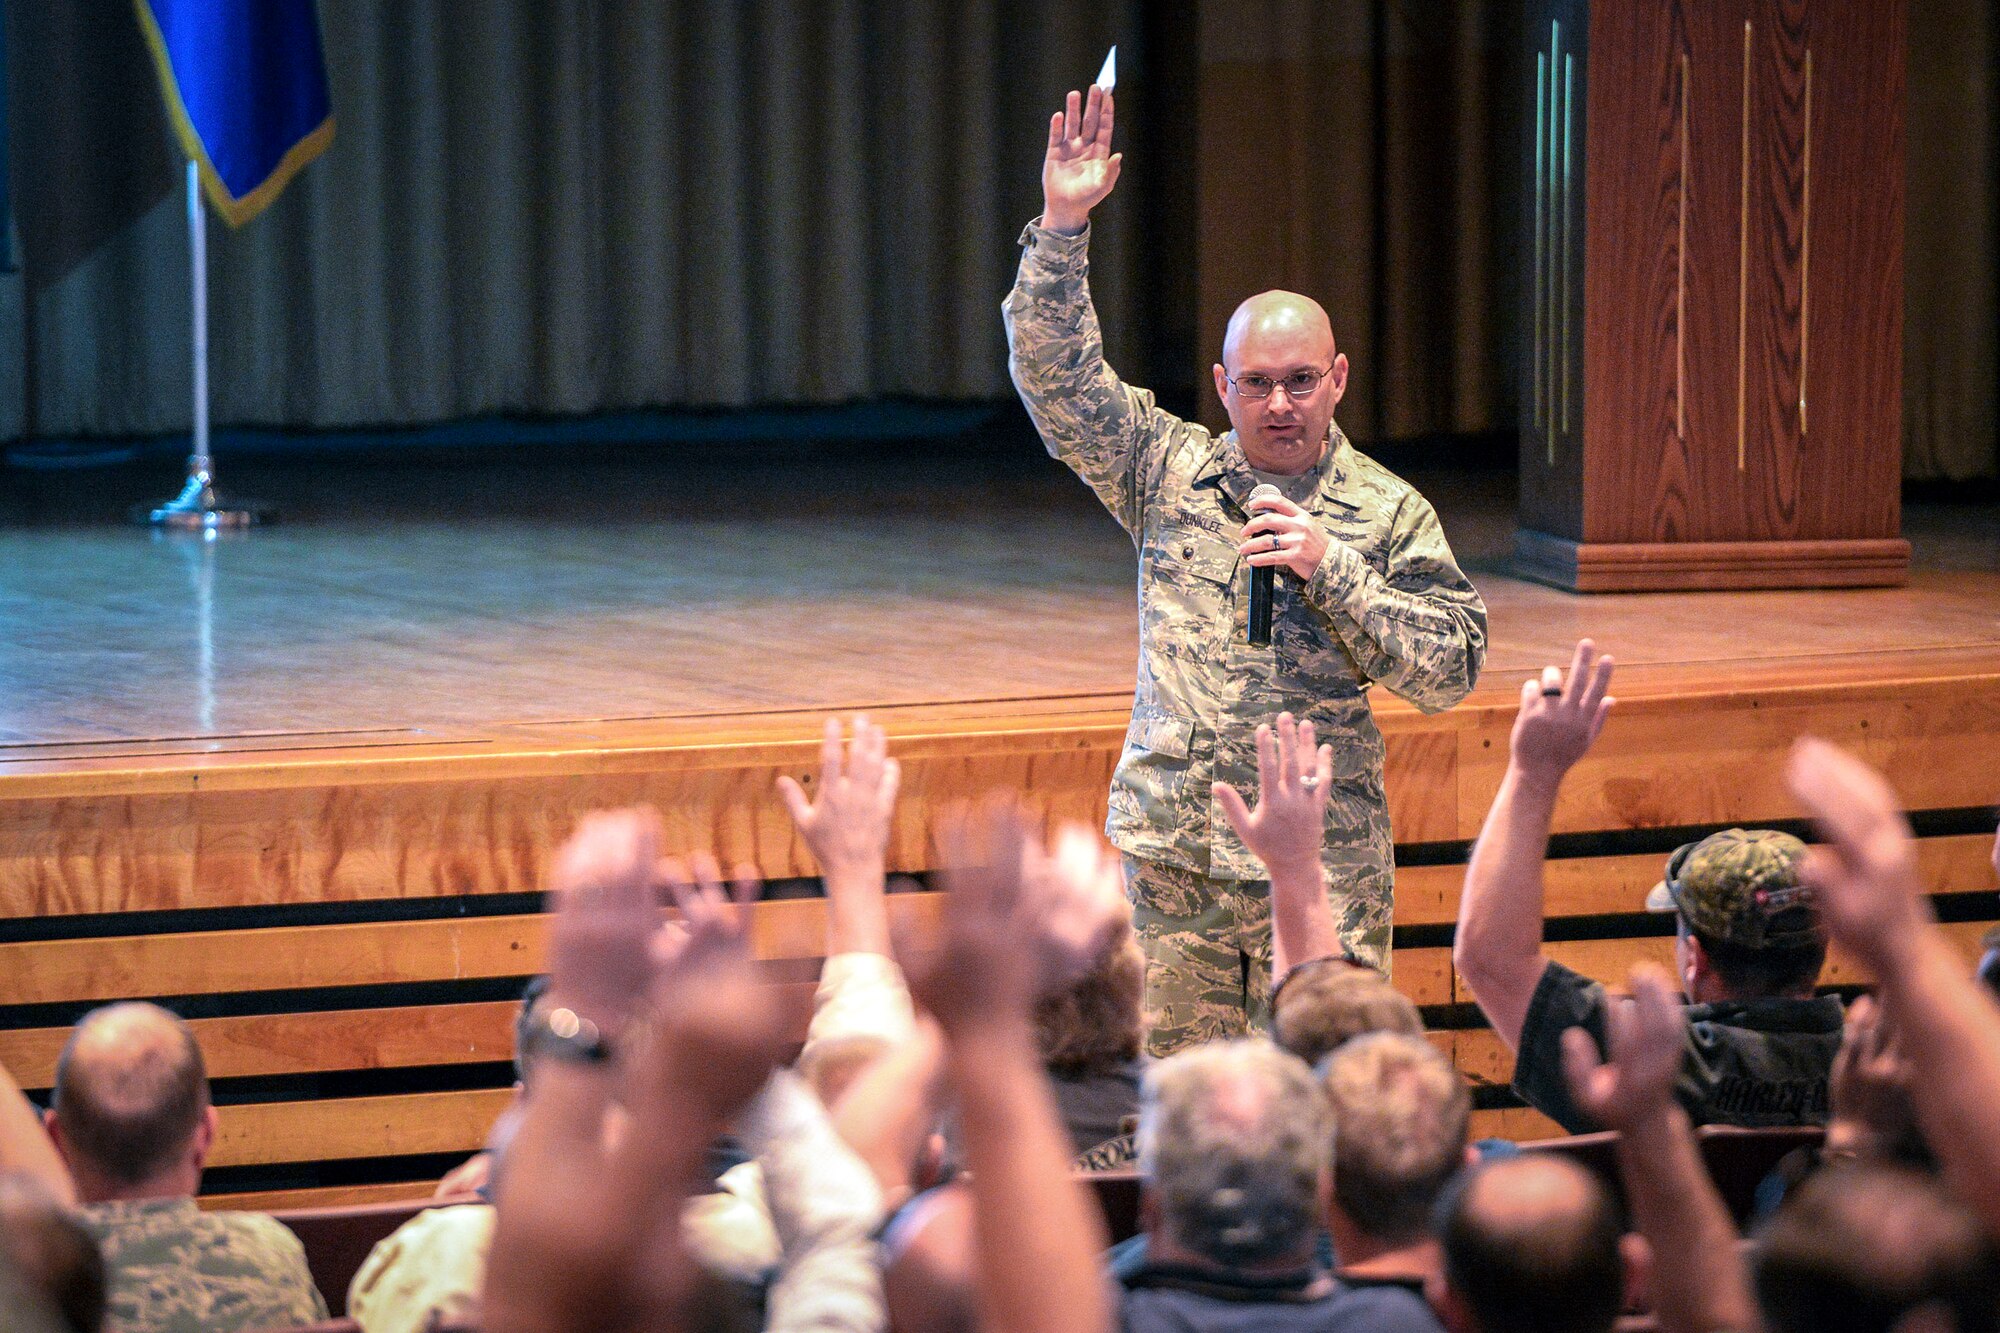 Col. David Dunklee, 75th Air Base Wing vice commander, asks for a show of hands from those who have attended Motorcycle Safety Foundation training. Dunklee provided opening remarks May 11 at the Hill Air Force Base during annual motorcycle safety briefings. (U.S. Air Force/Paul Holcomb)